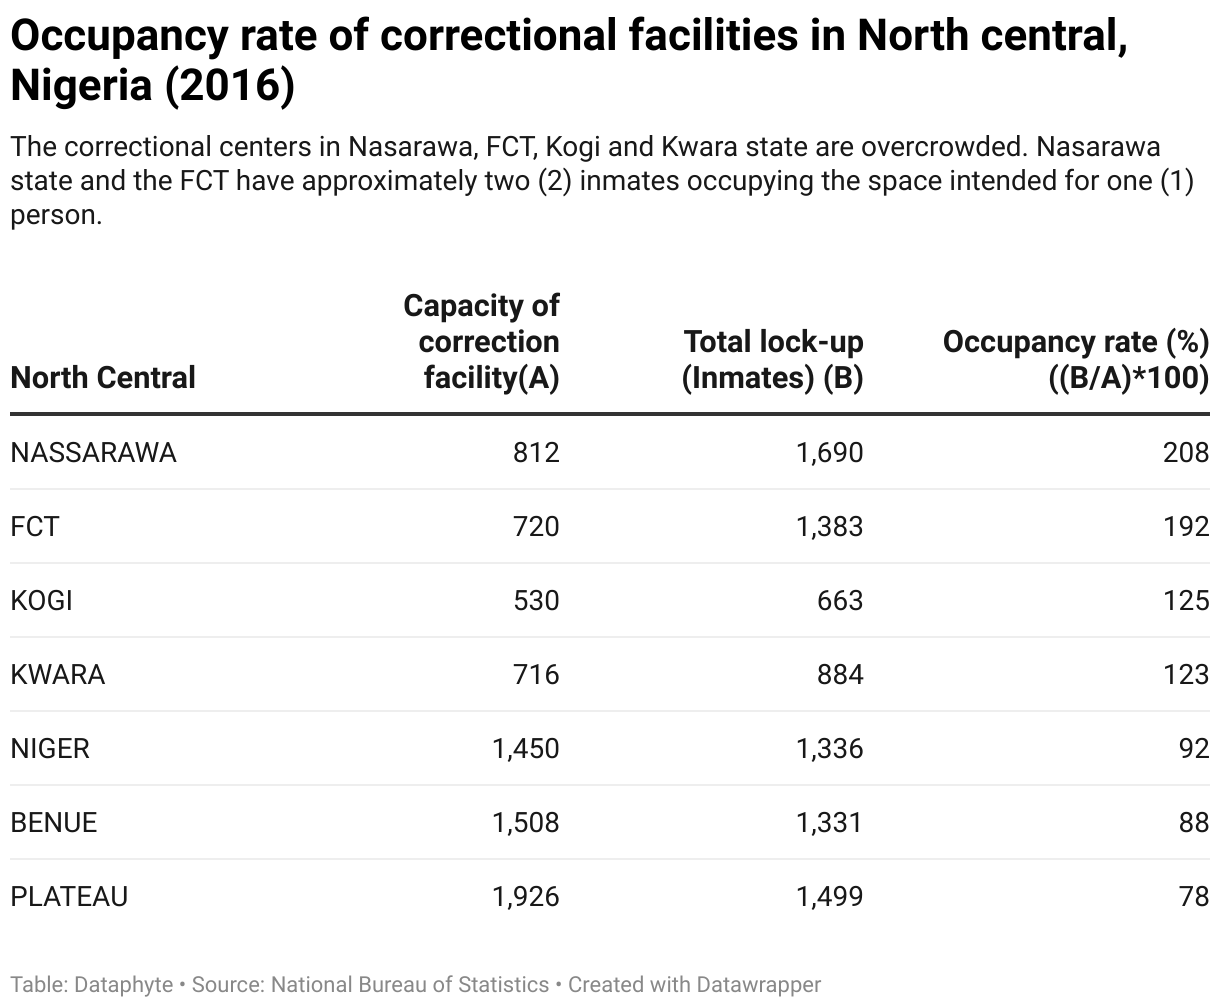 Occupancy rate of correctional centres in North central Nigeria